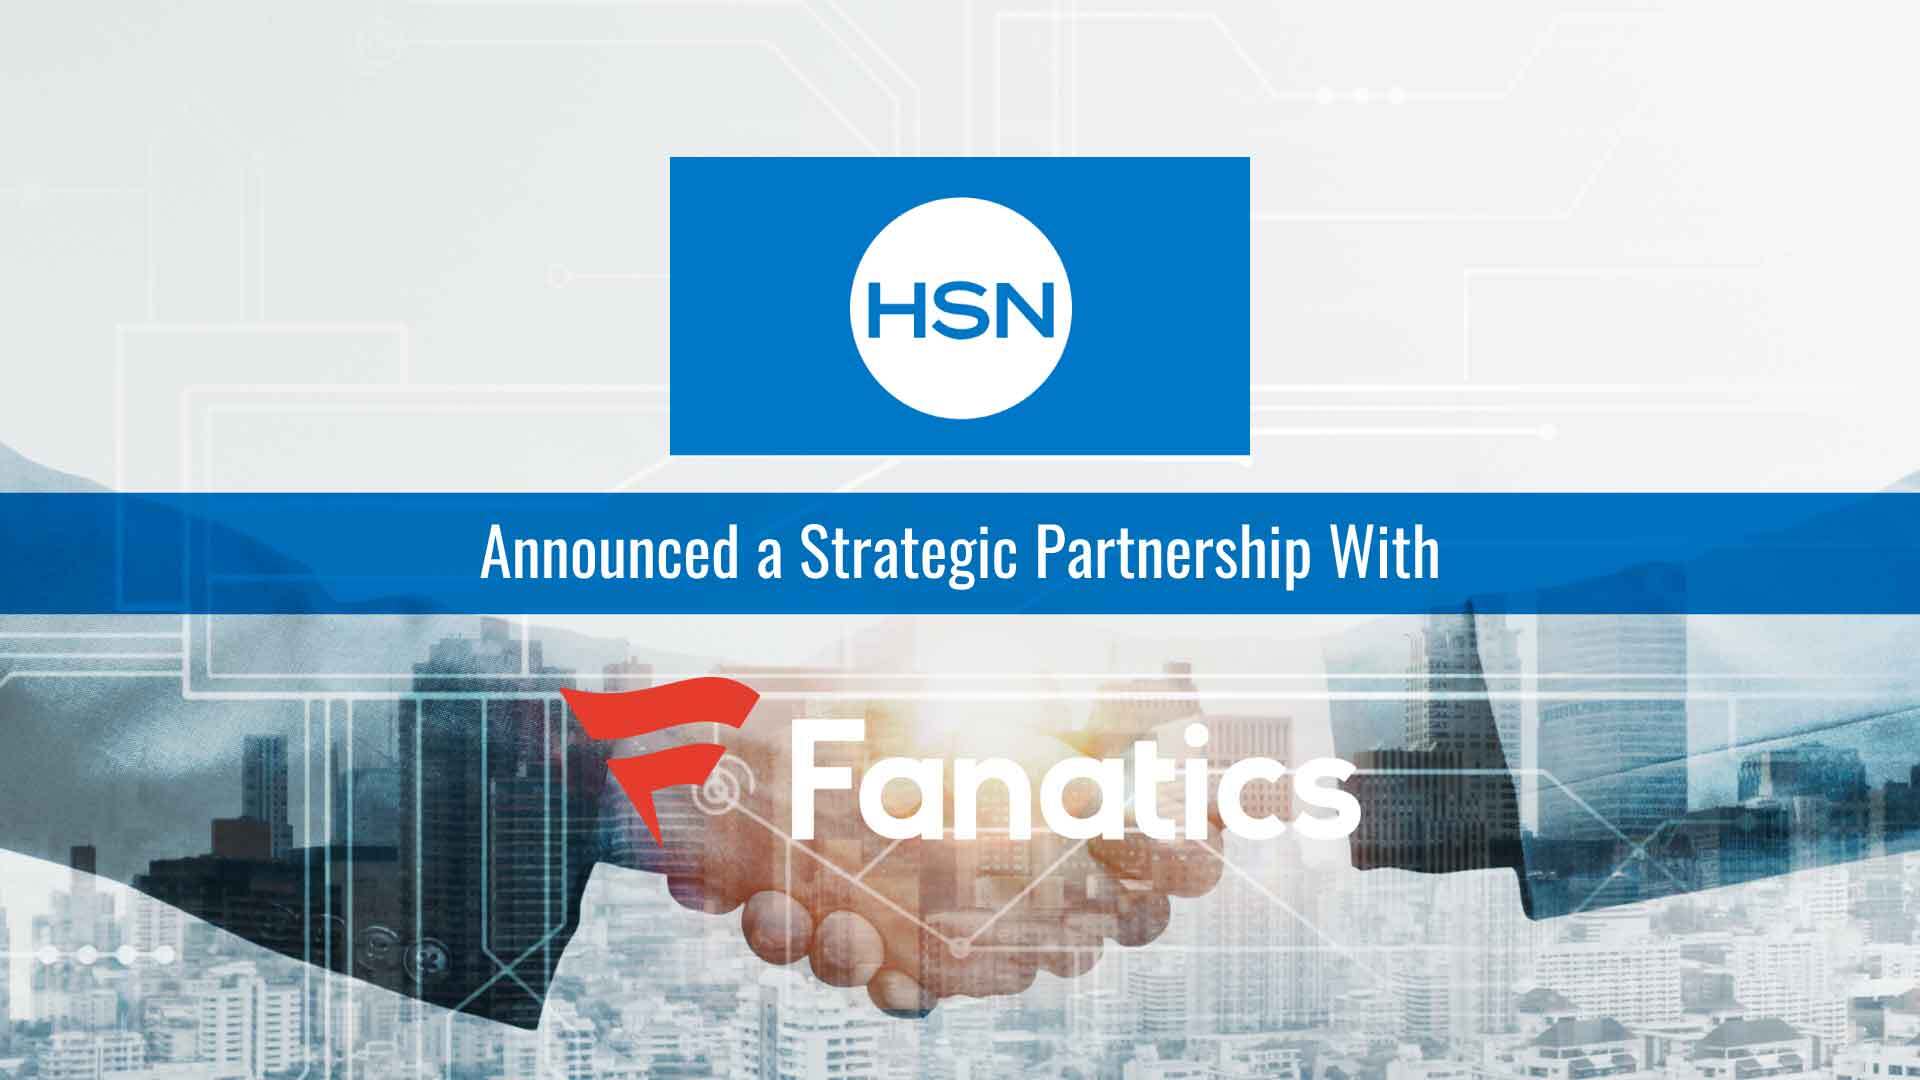 HSN AND FANATICS TEAM UP TO ENHANCE SHOPPING EXPERIENCE FOR SPORTS FANS